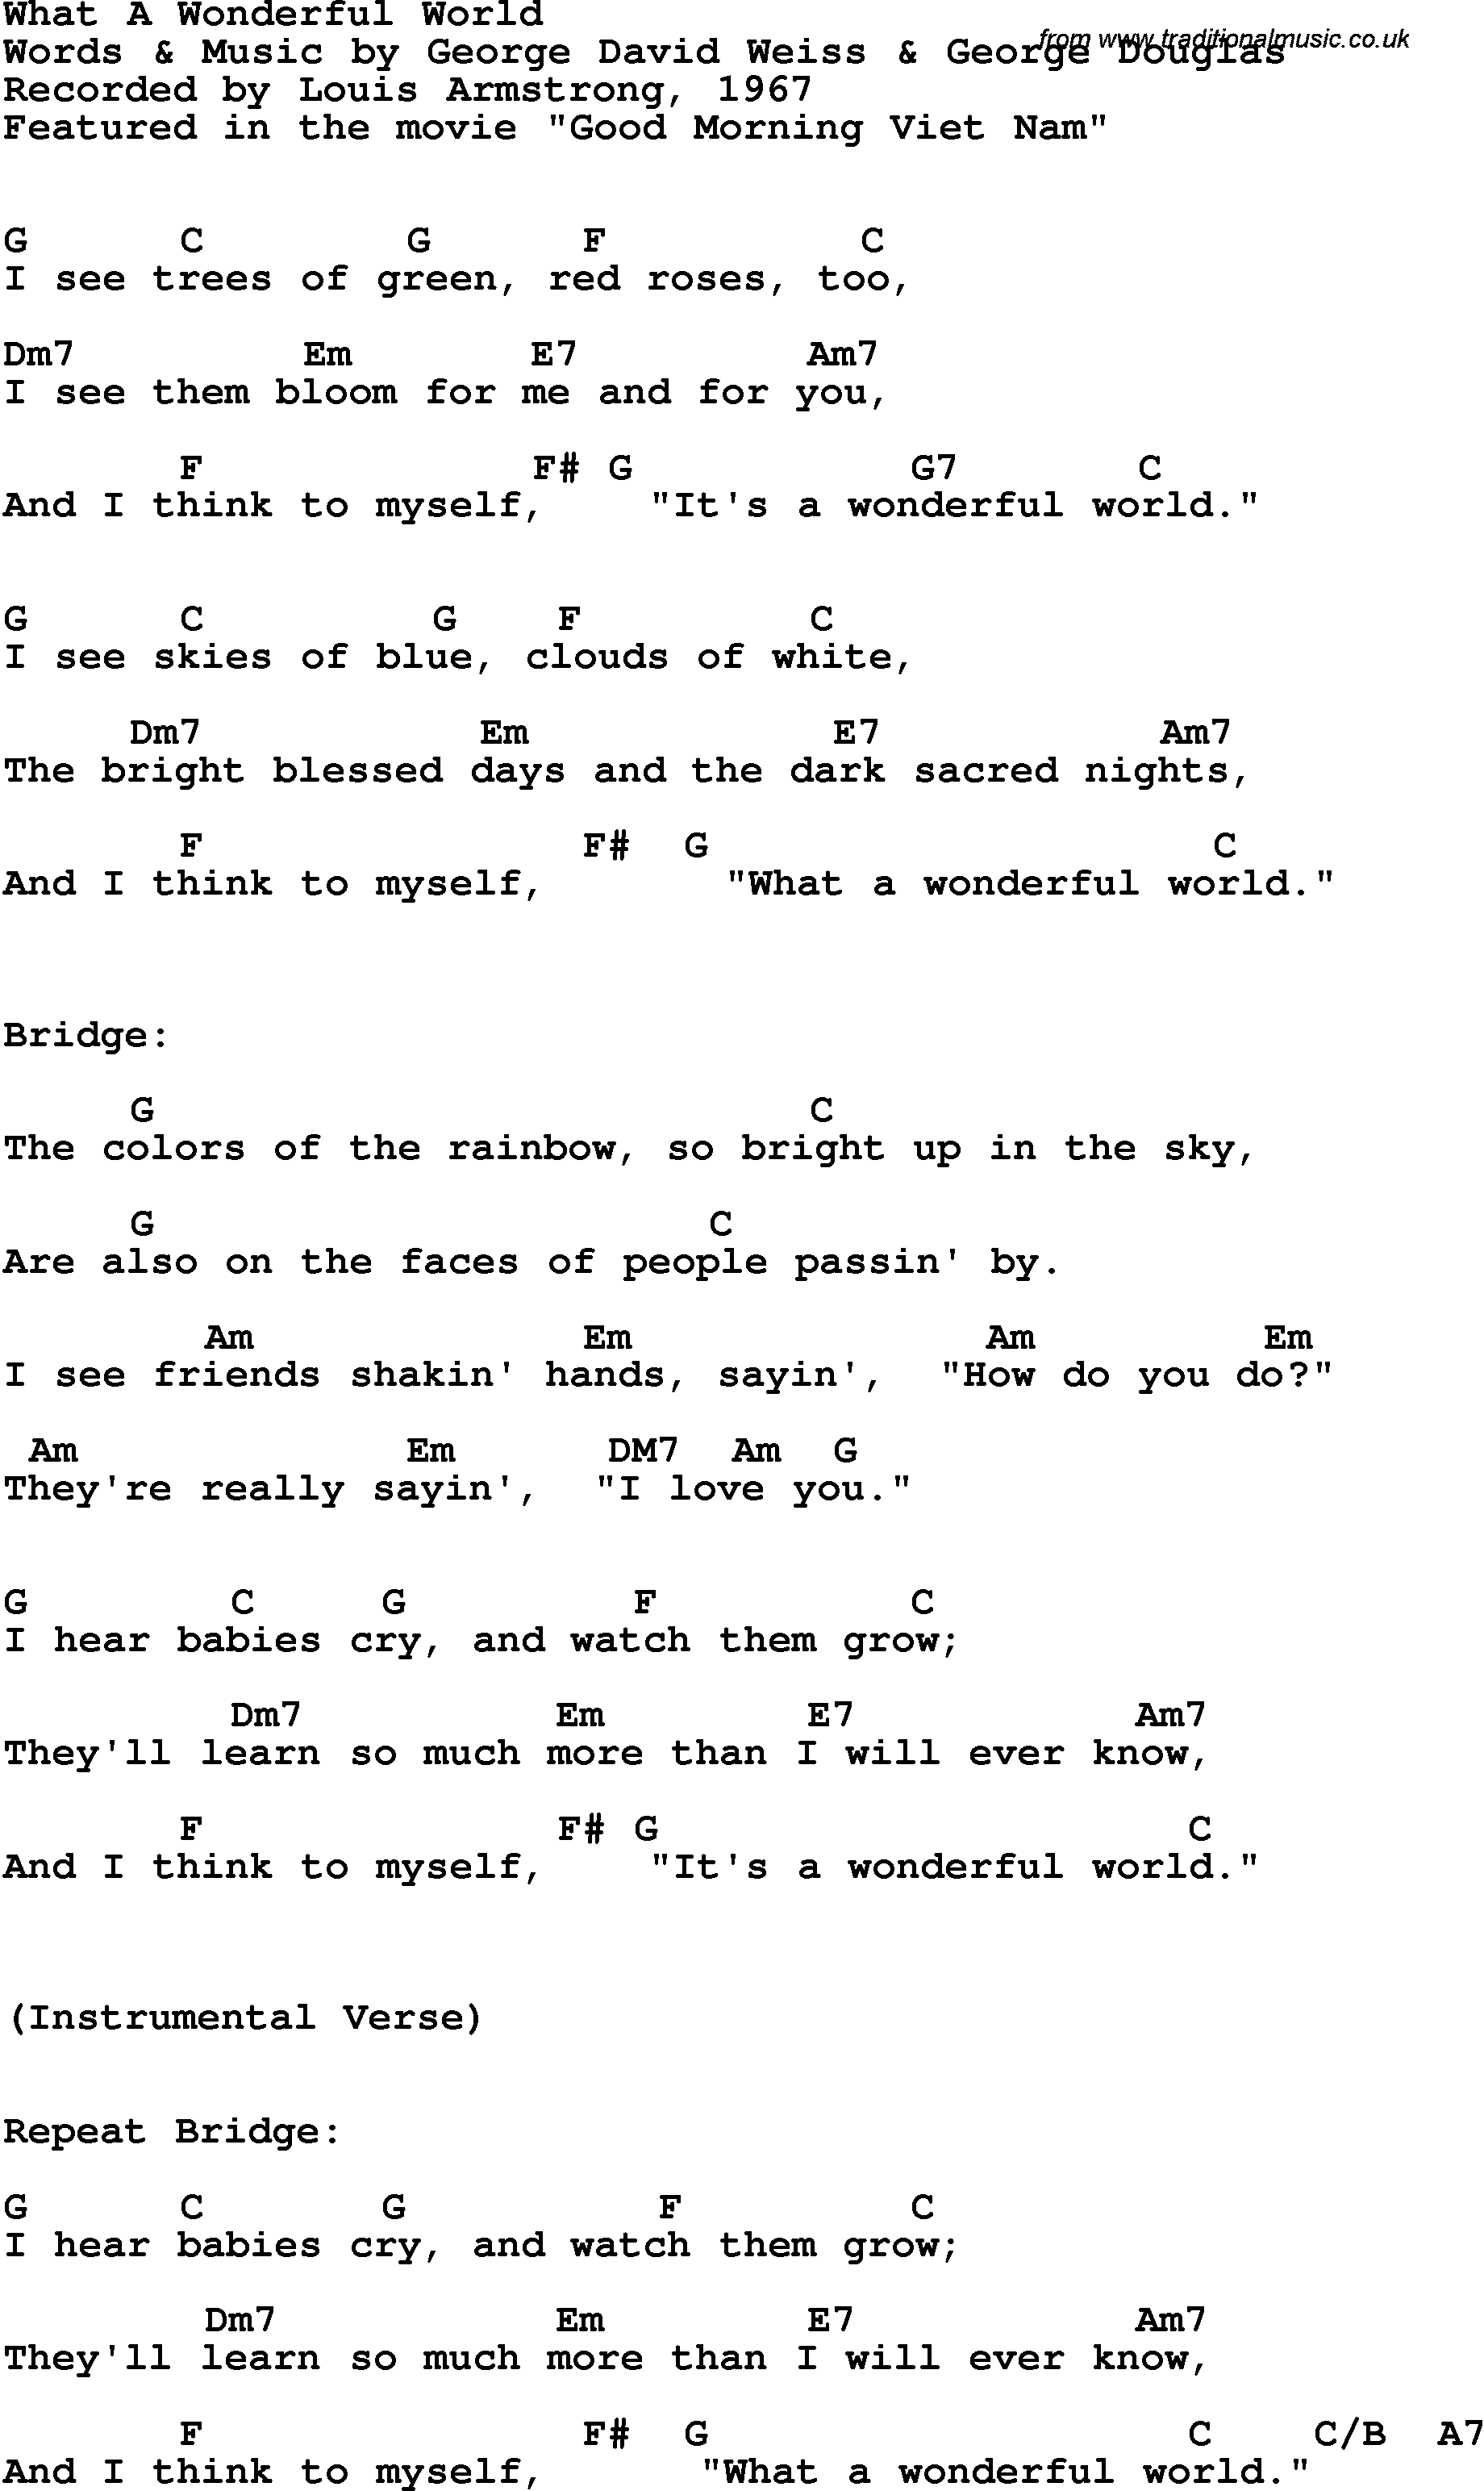 Song Lyrics with guitar chords for What A Wonderful World - Louis Armstrong, 1967